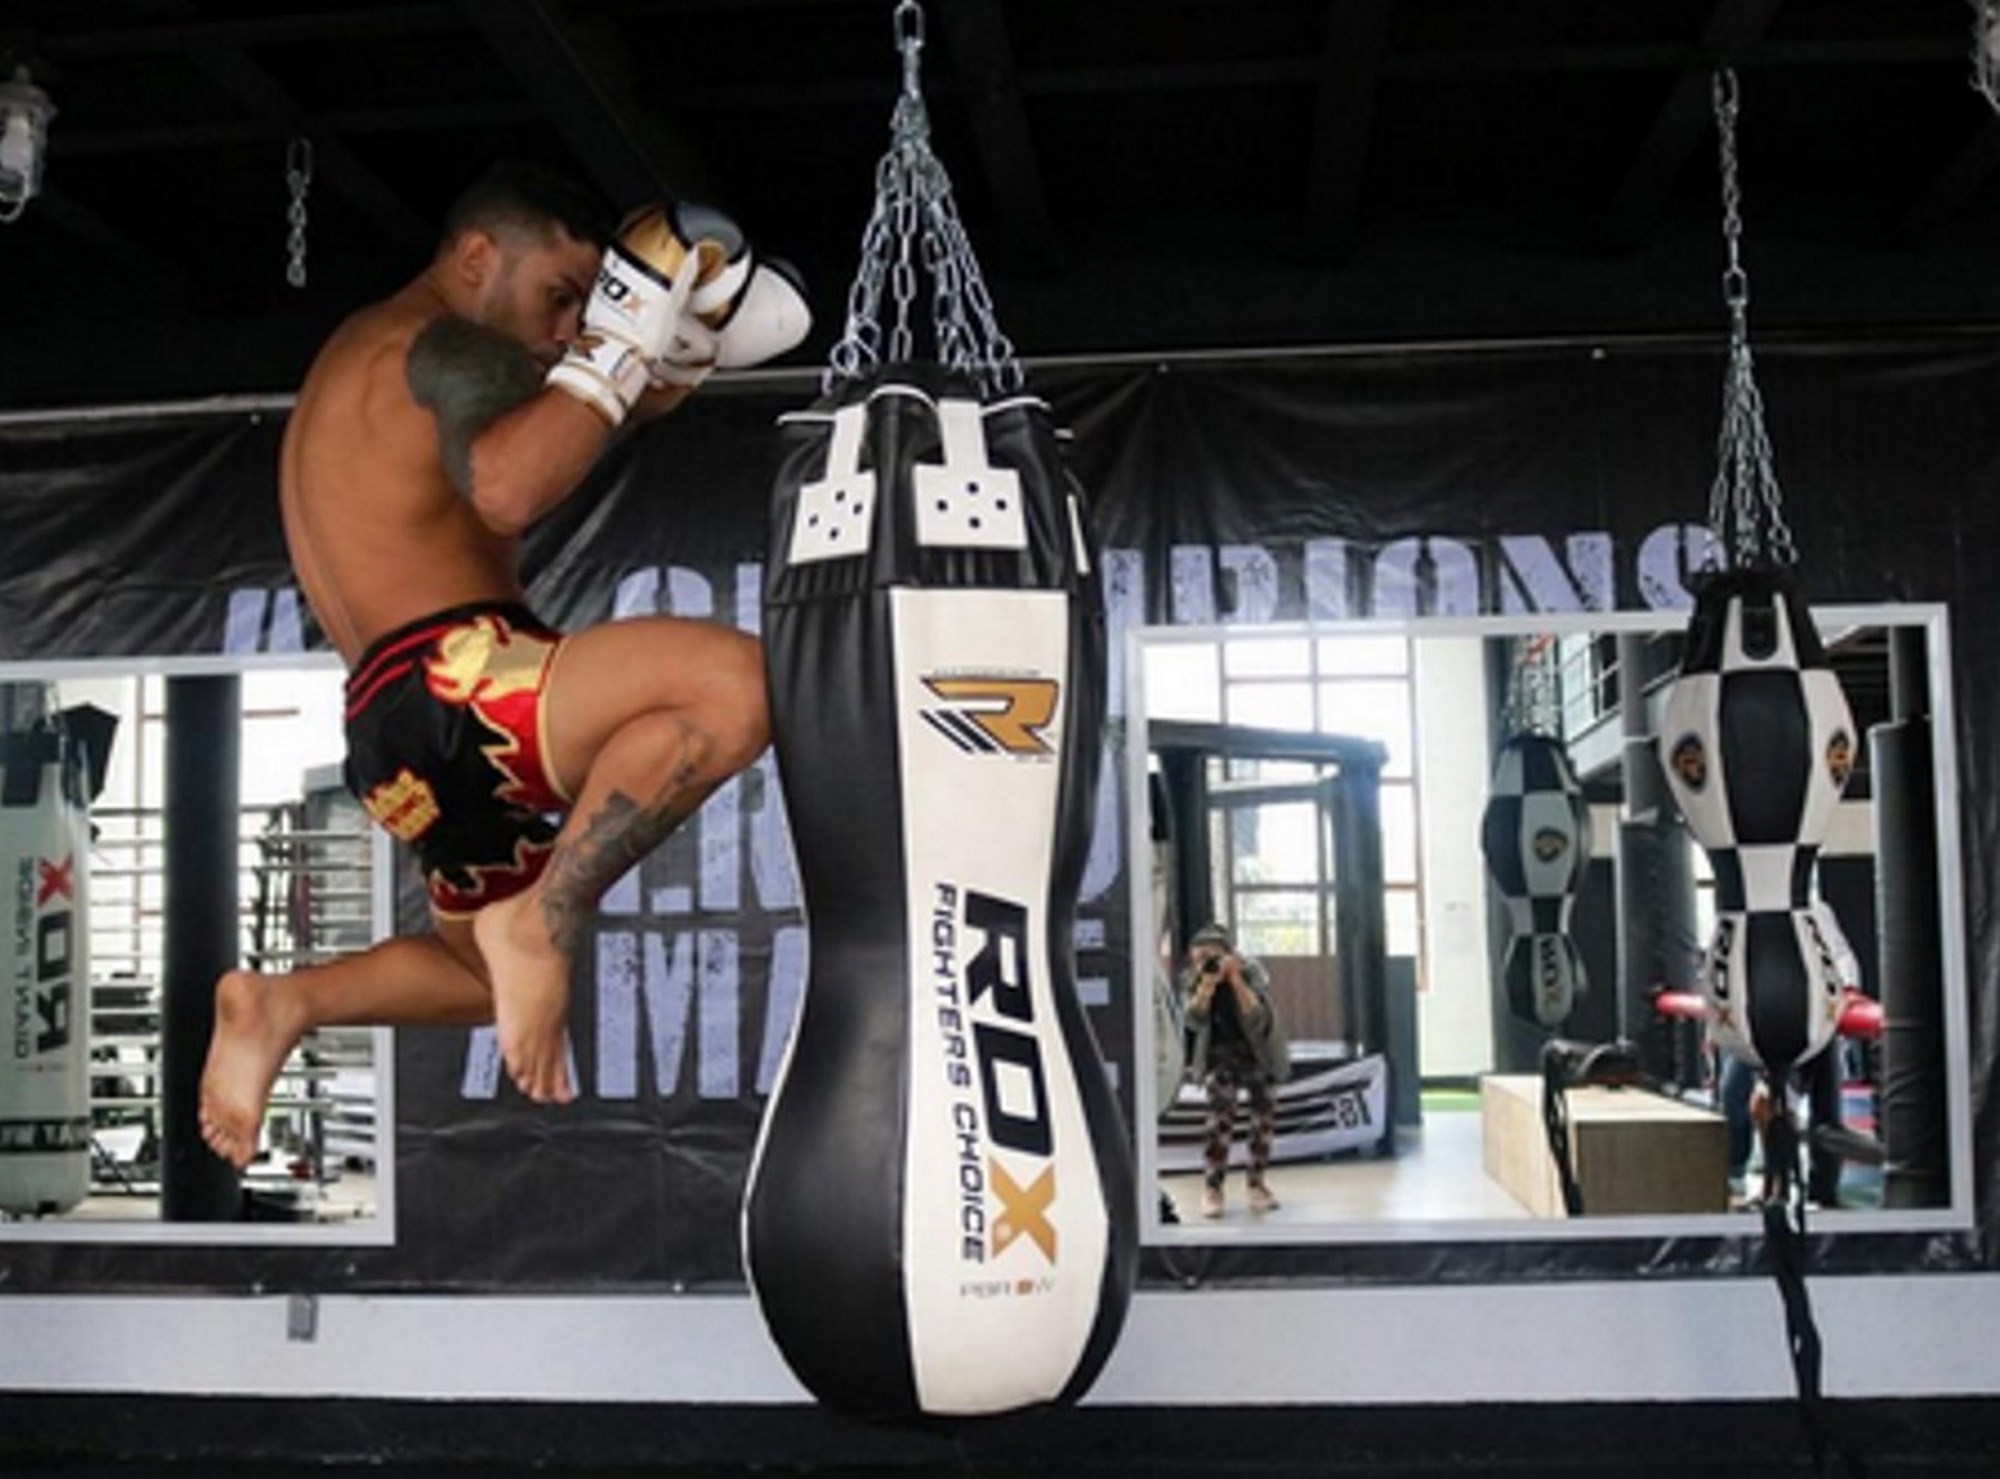 Training for a MMA fight - training for the MMA sport